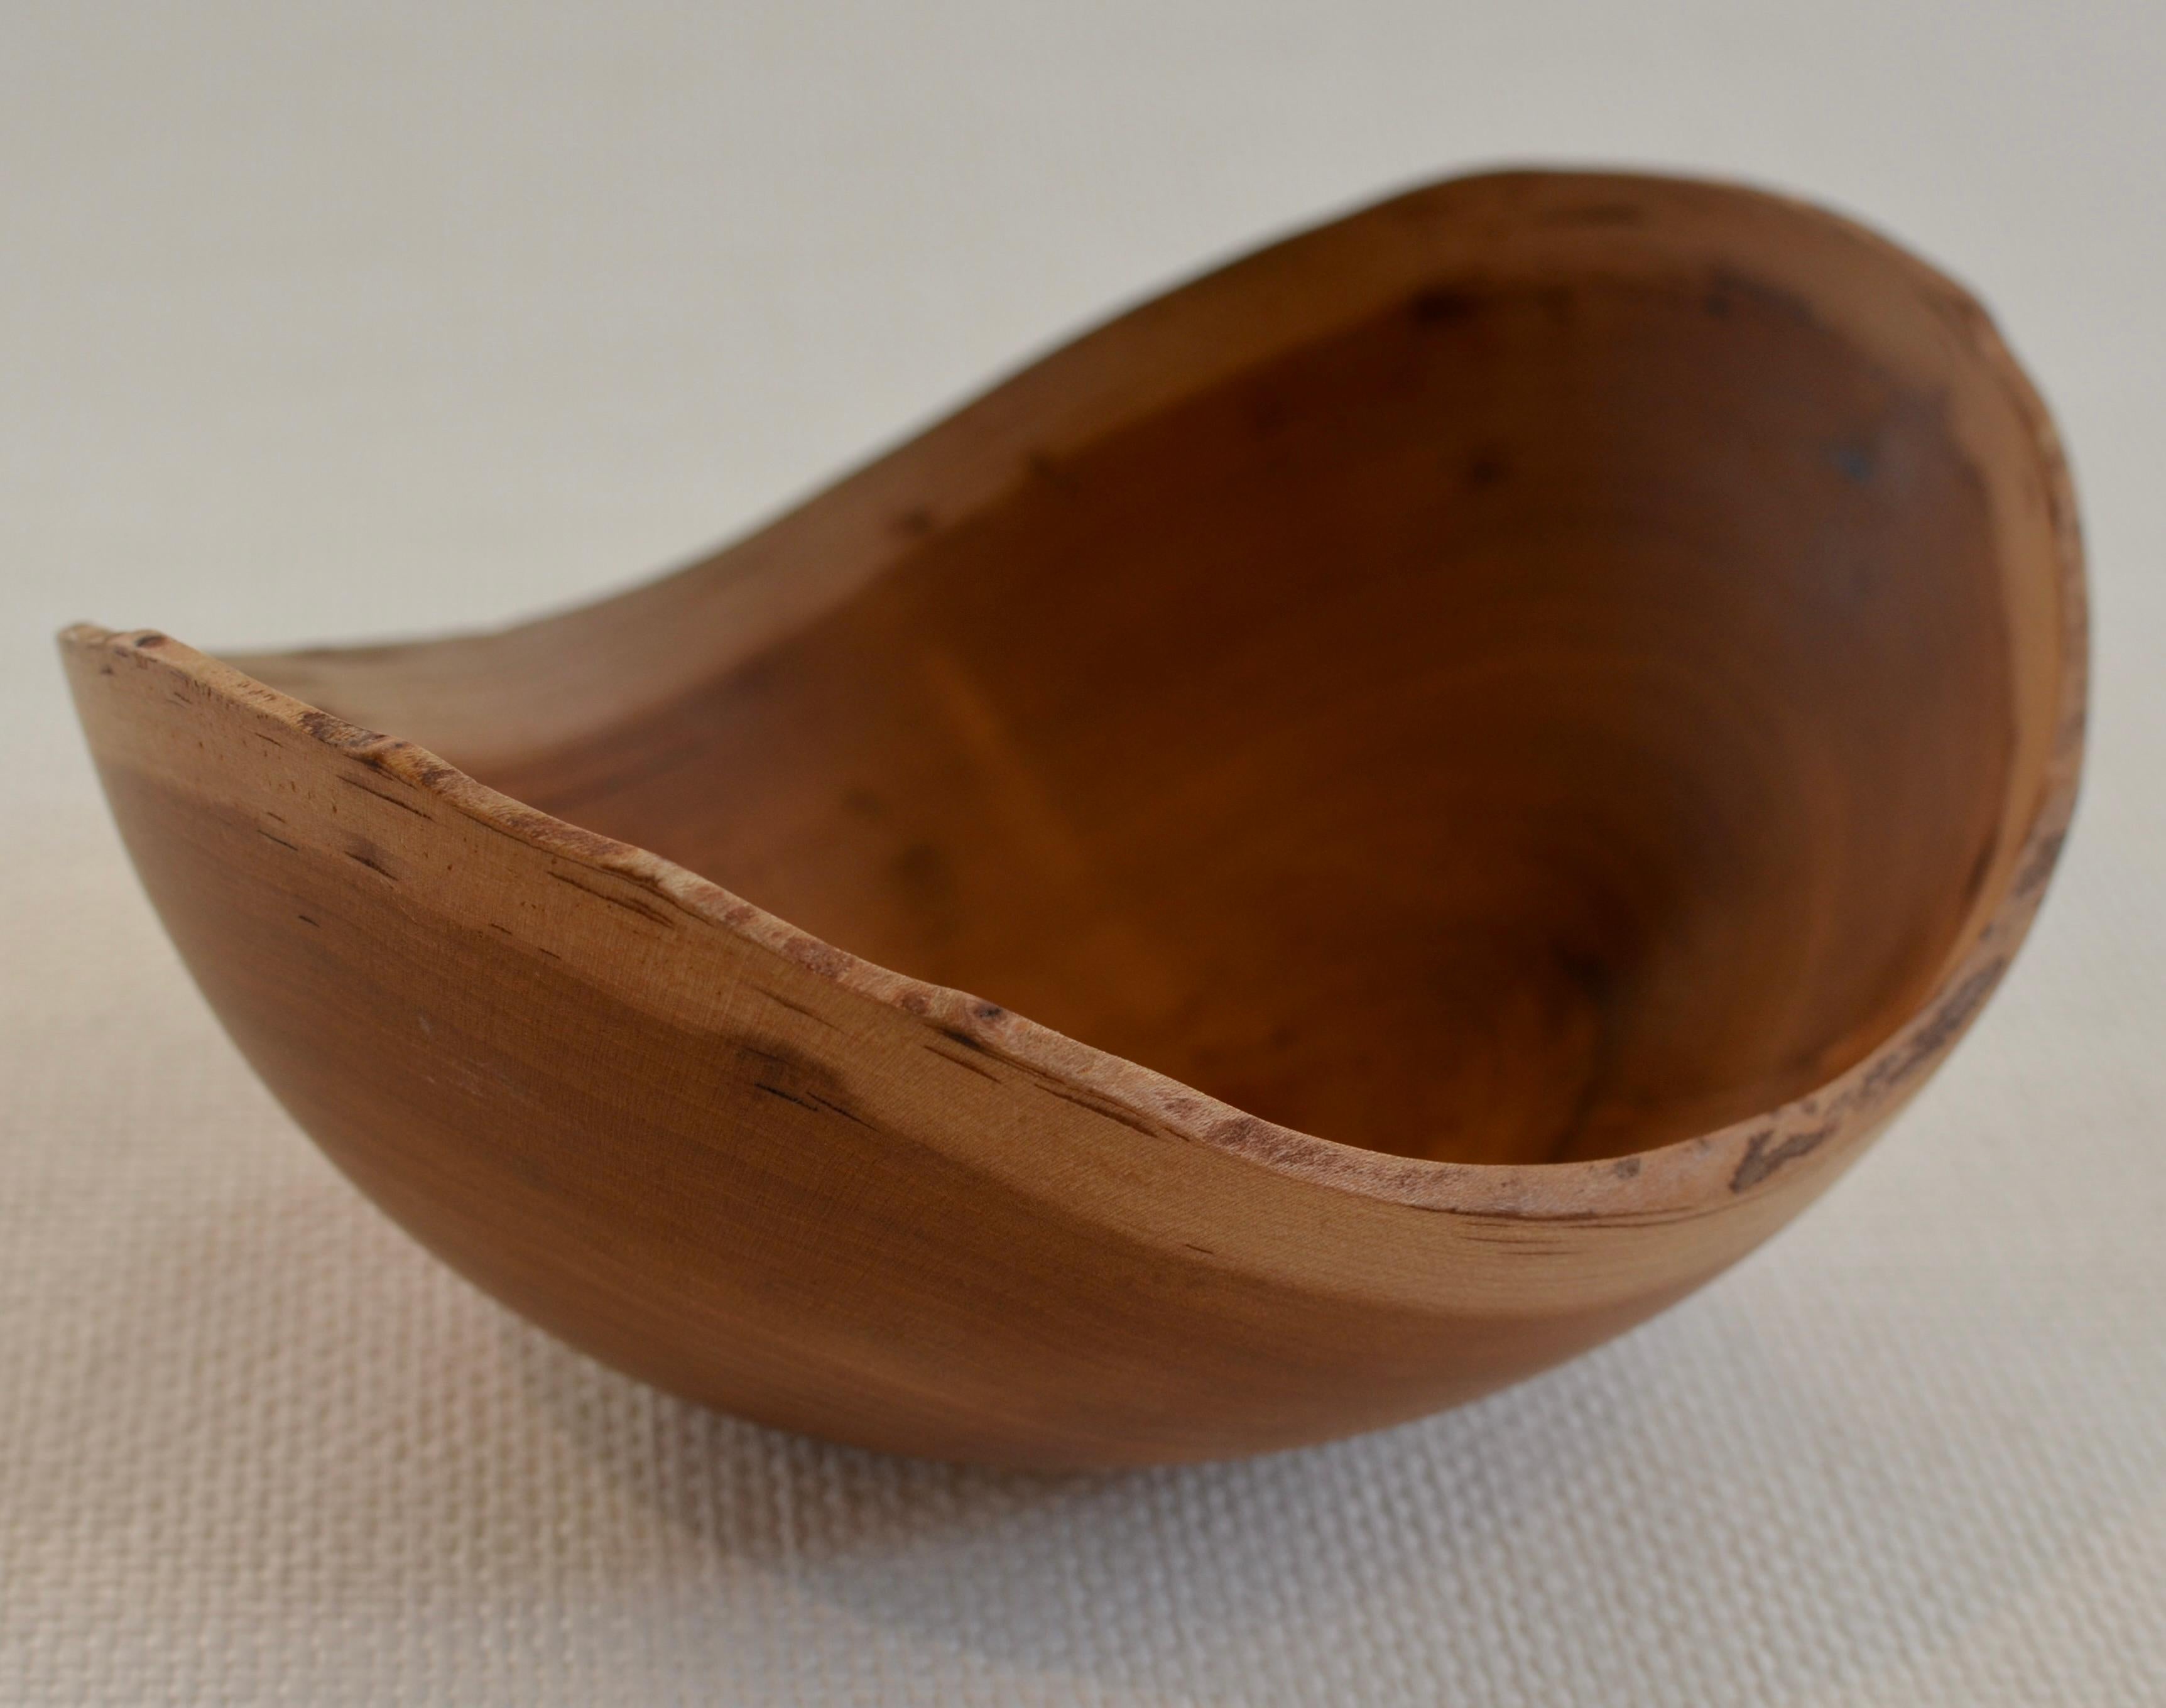 Hand-carved Cherry wood bowl with natural edge. Created using wood only from fallen Cherry trees. One of a kind.